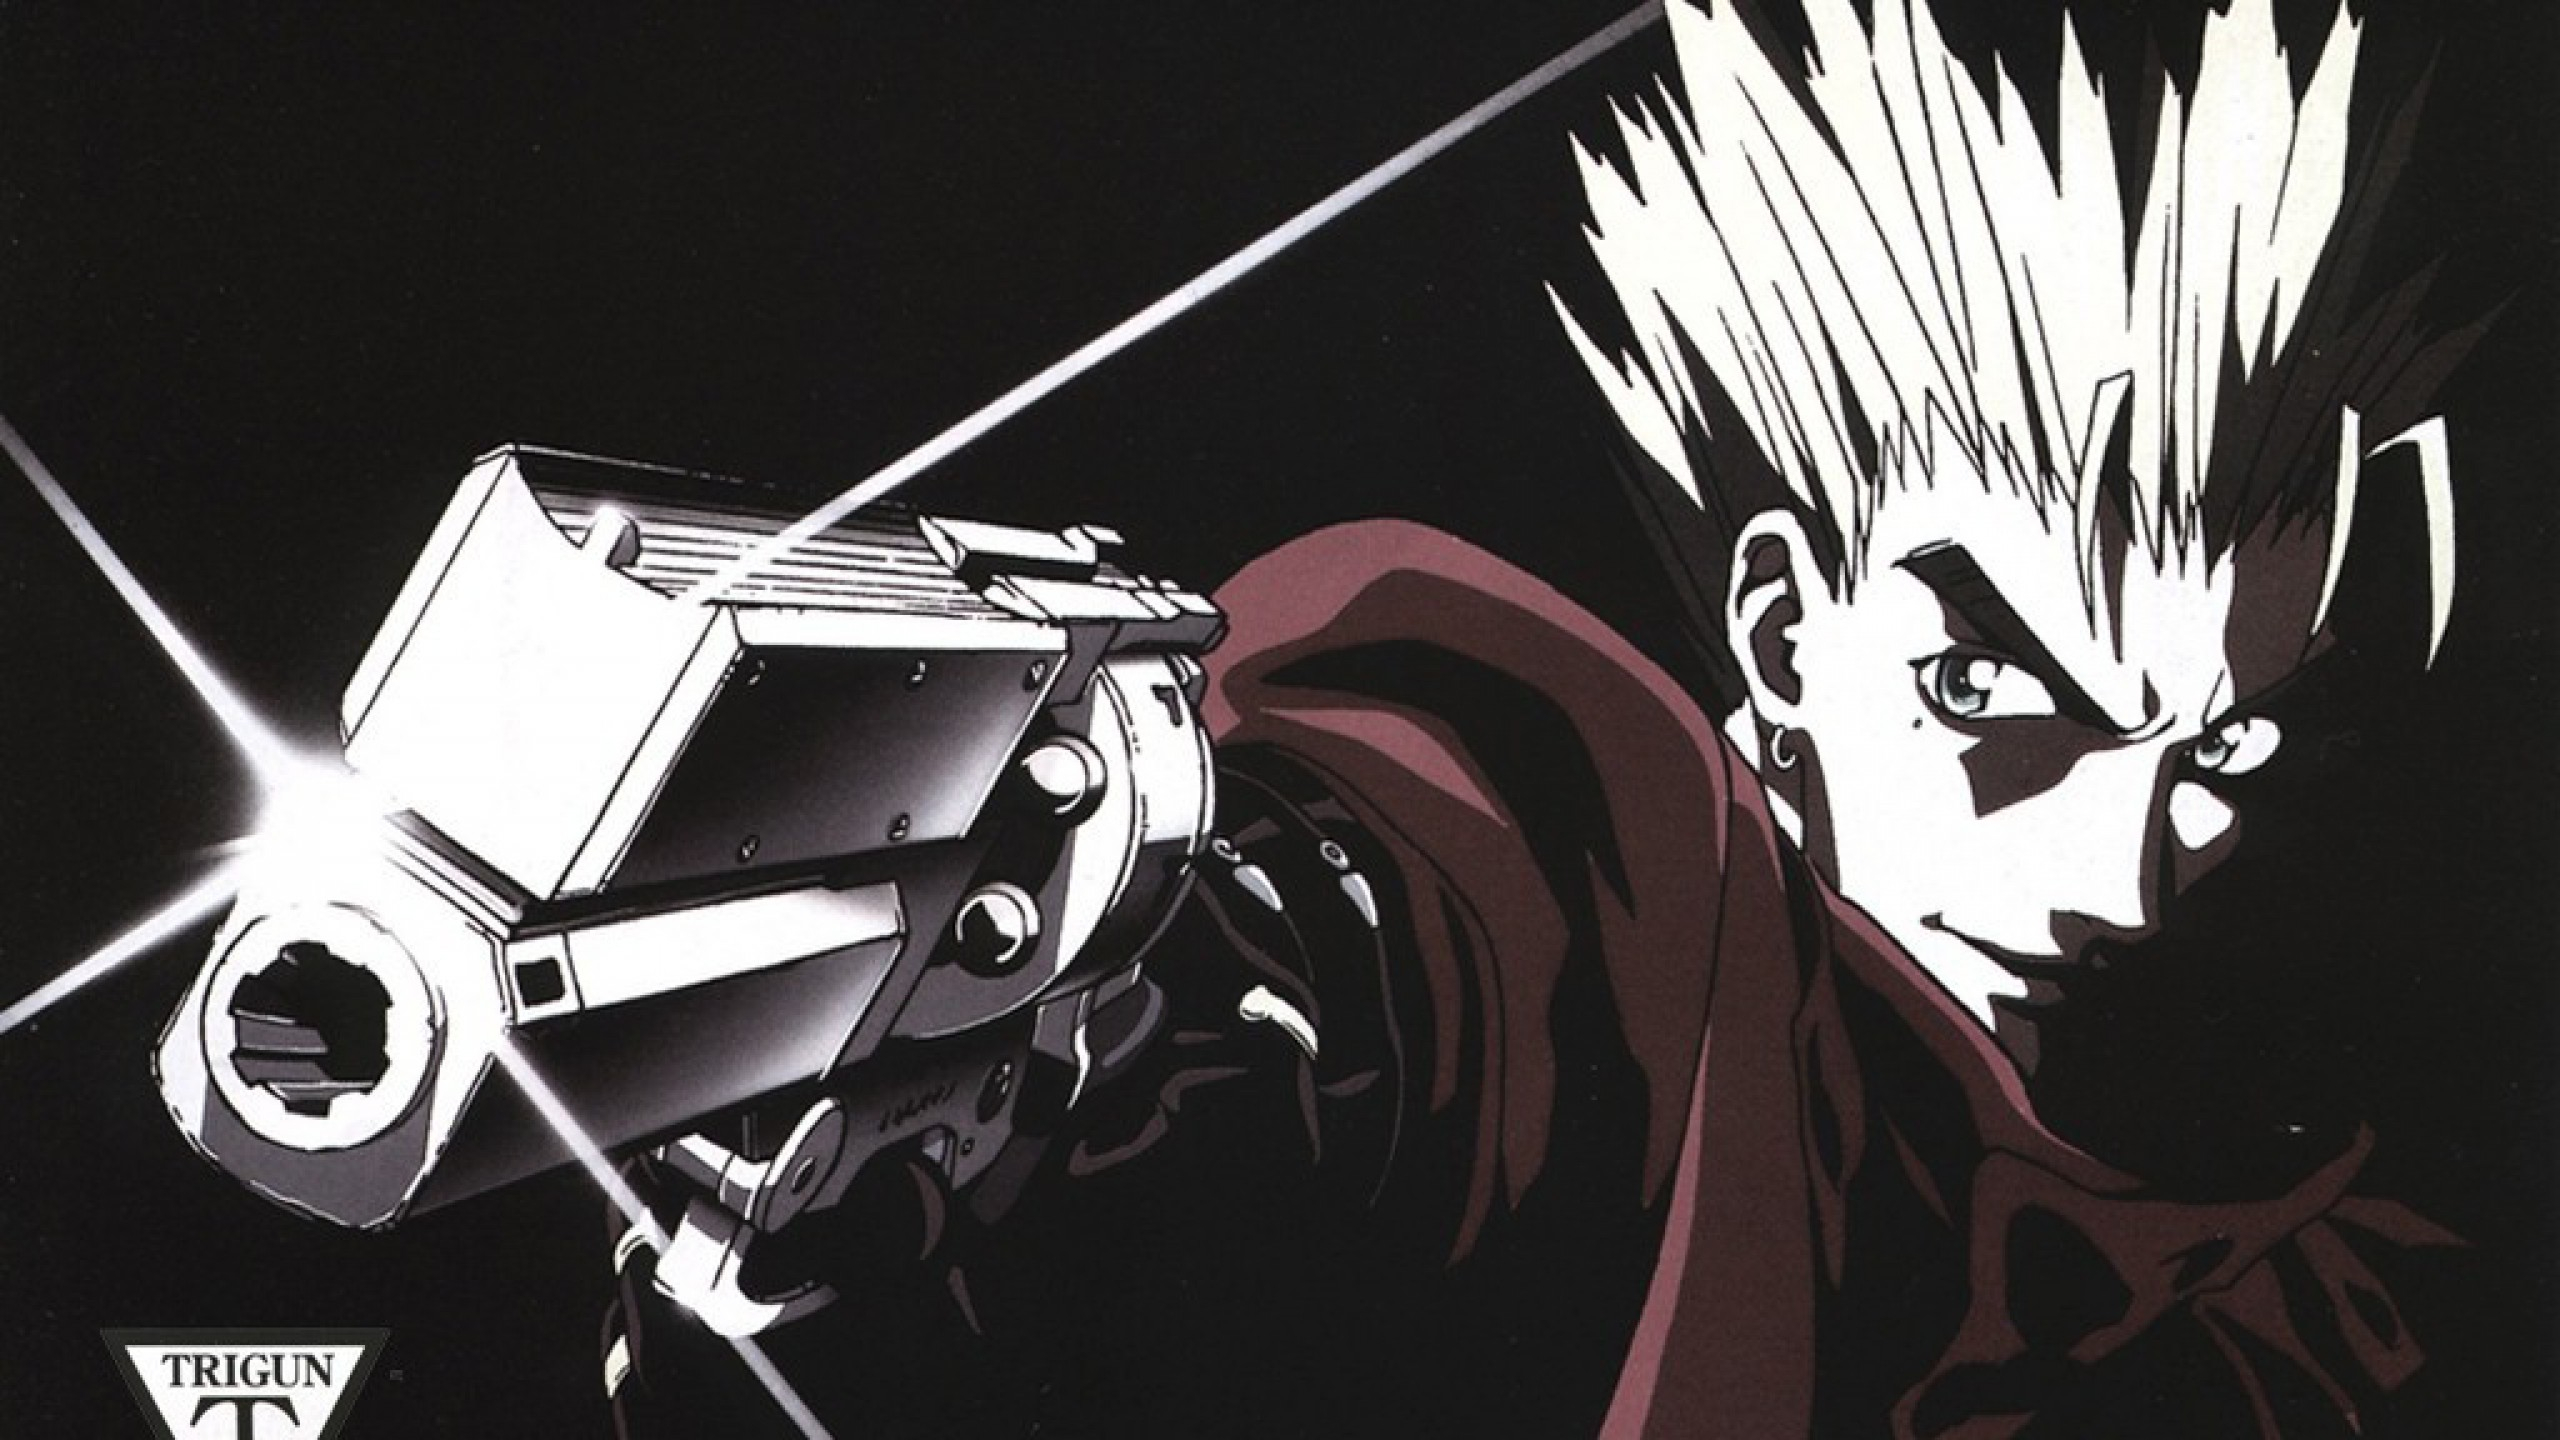 2560x1440 Trigun Wallpapers Thread /w/ Anime/Wallpapers